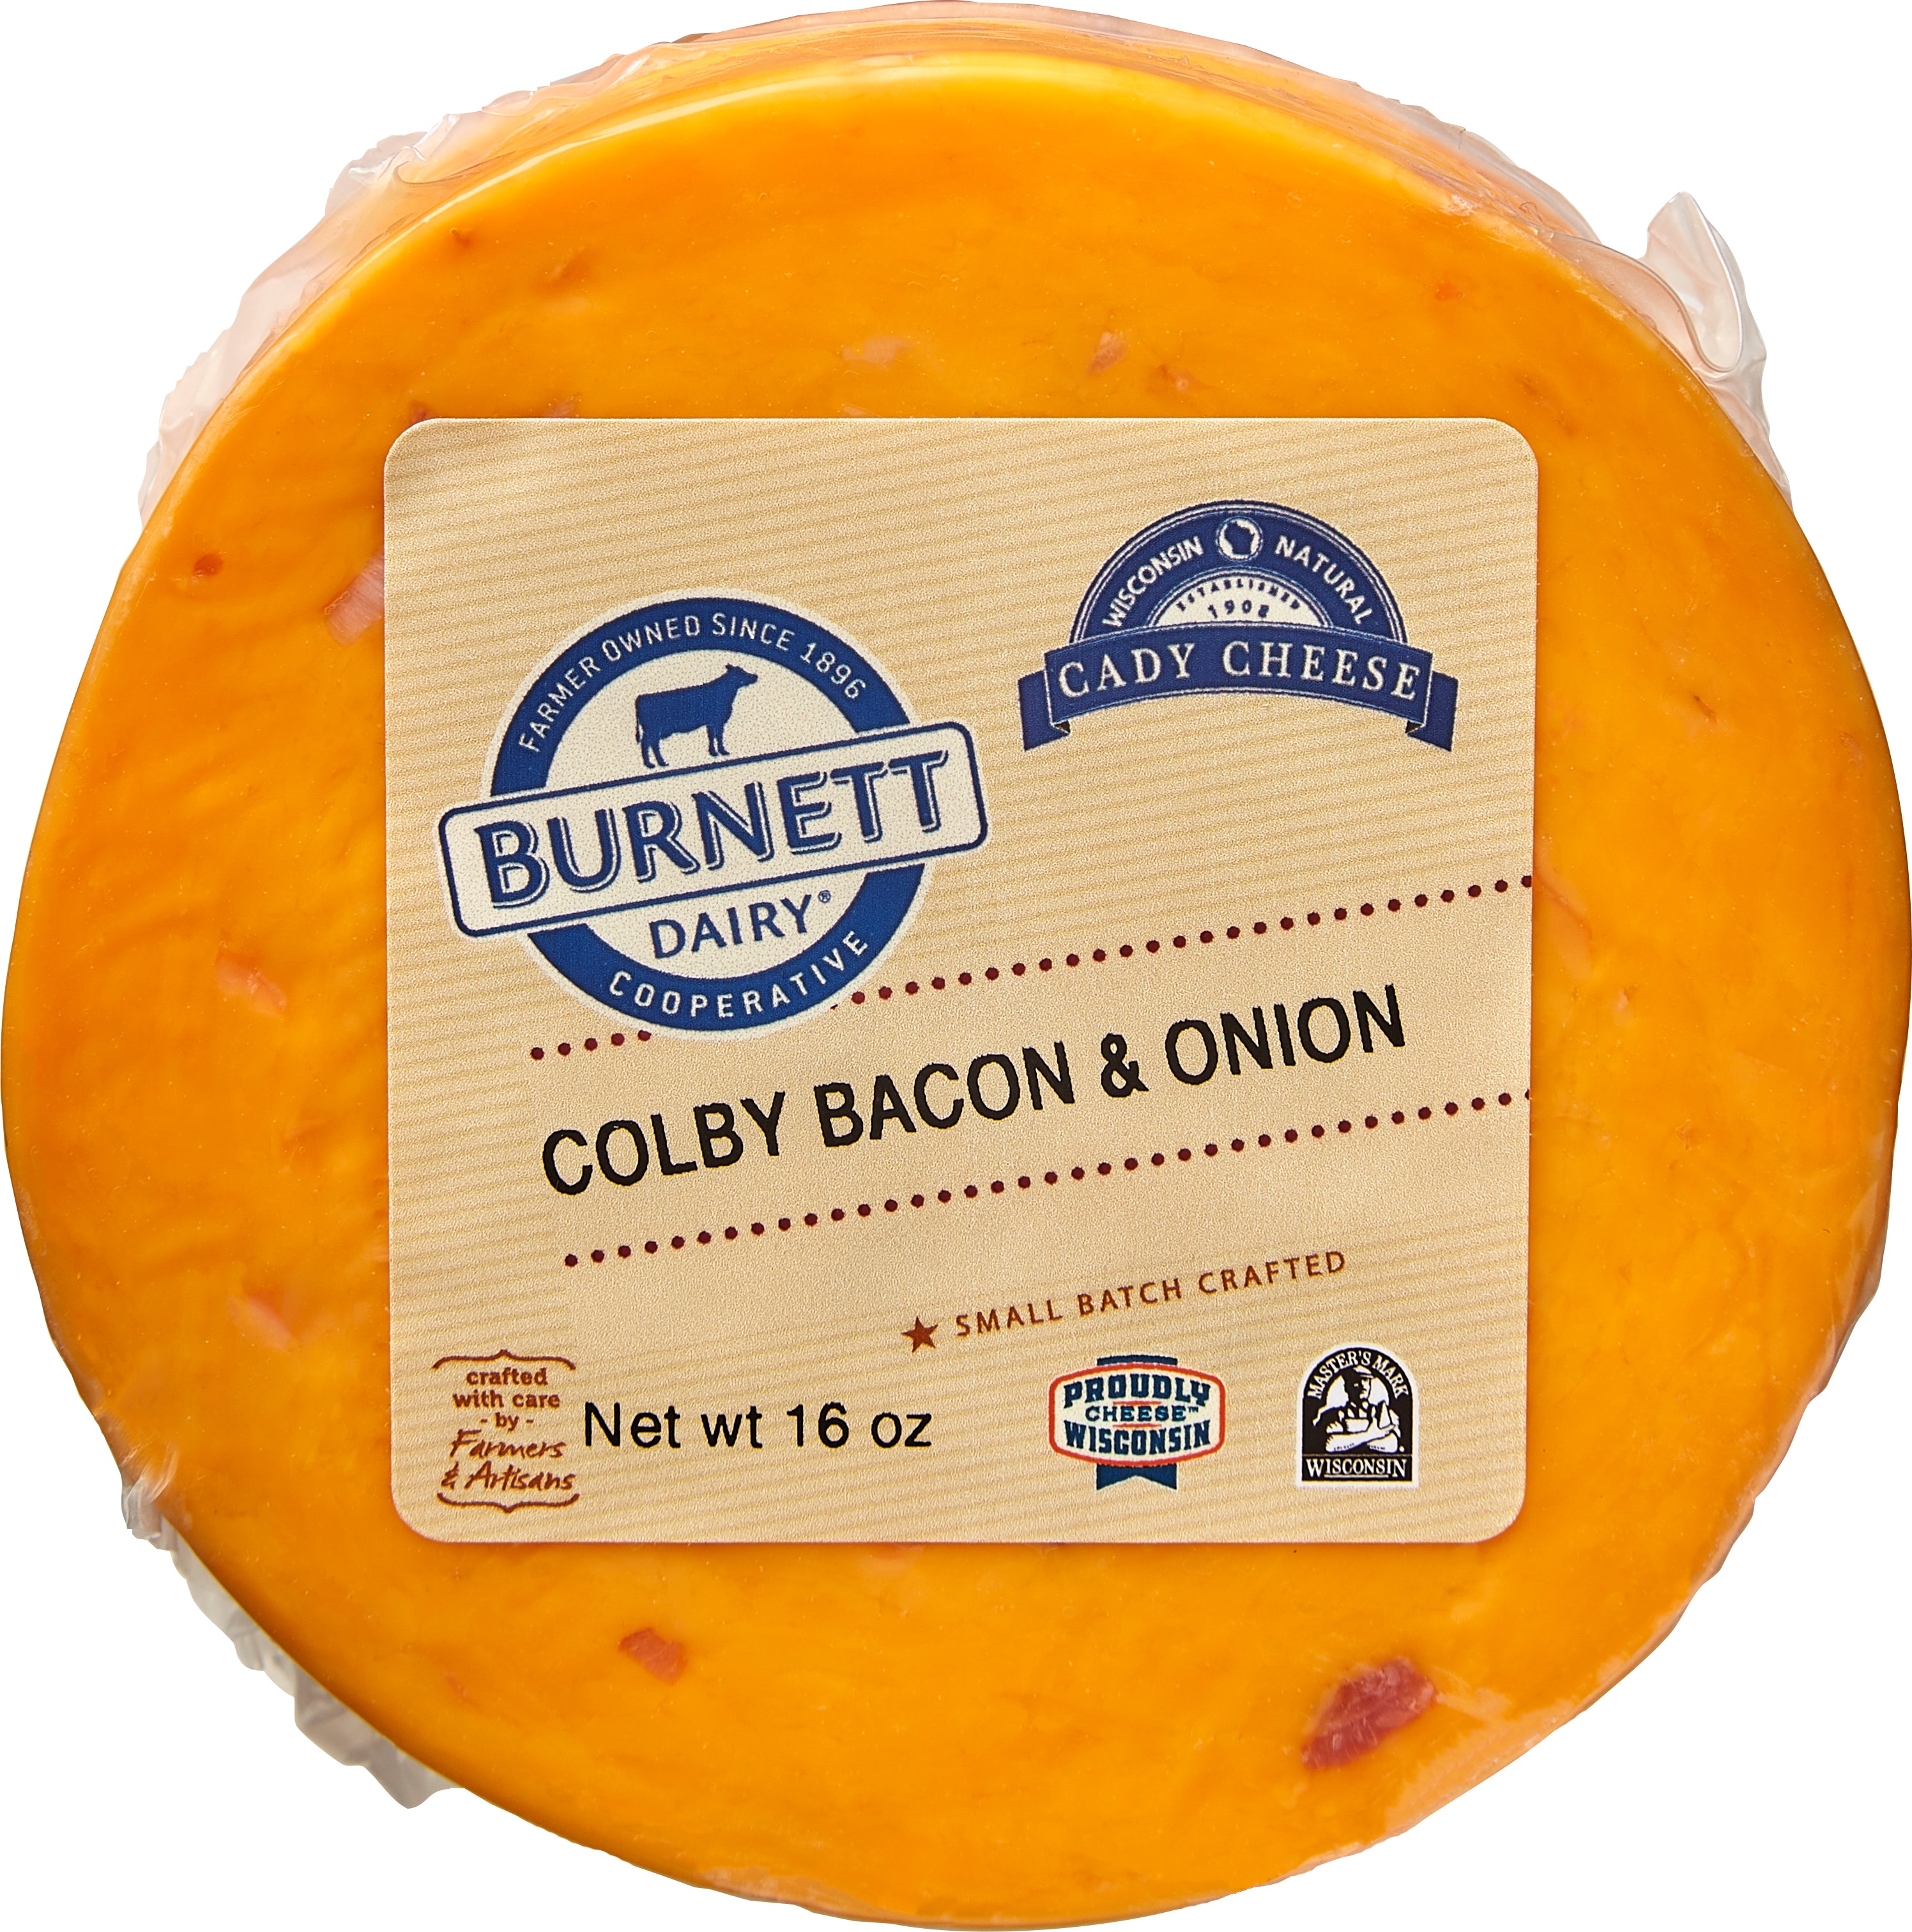 Colby Bacon Onion